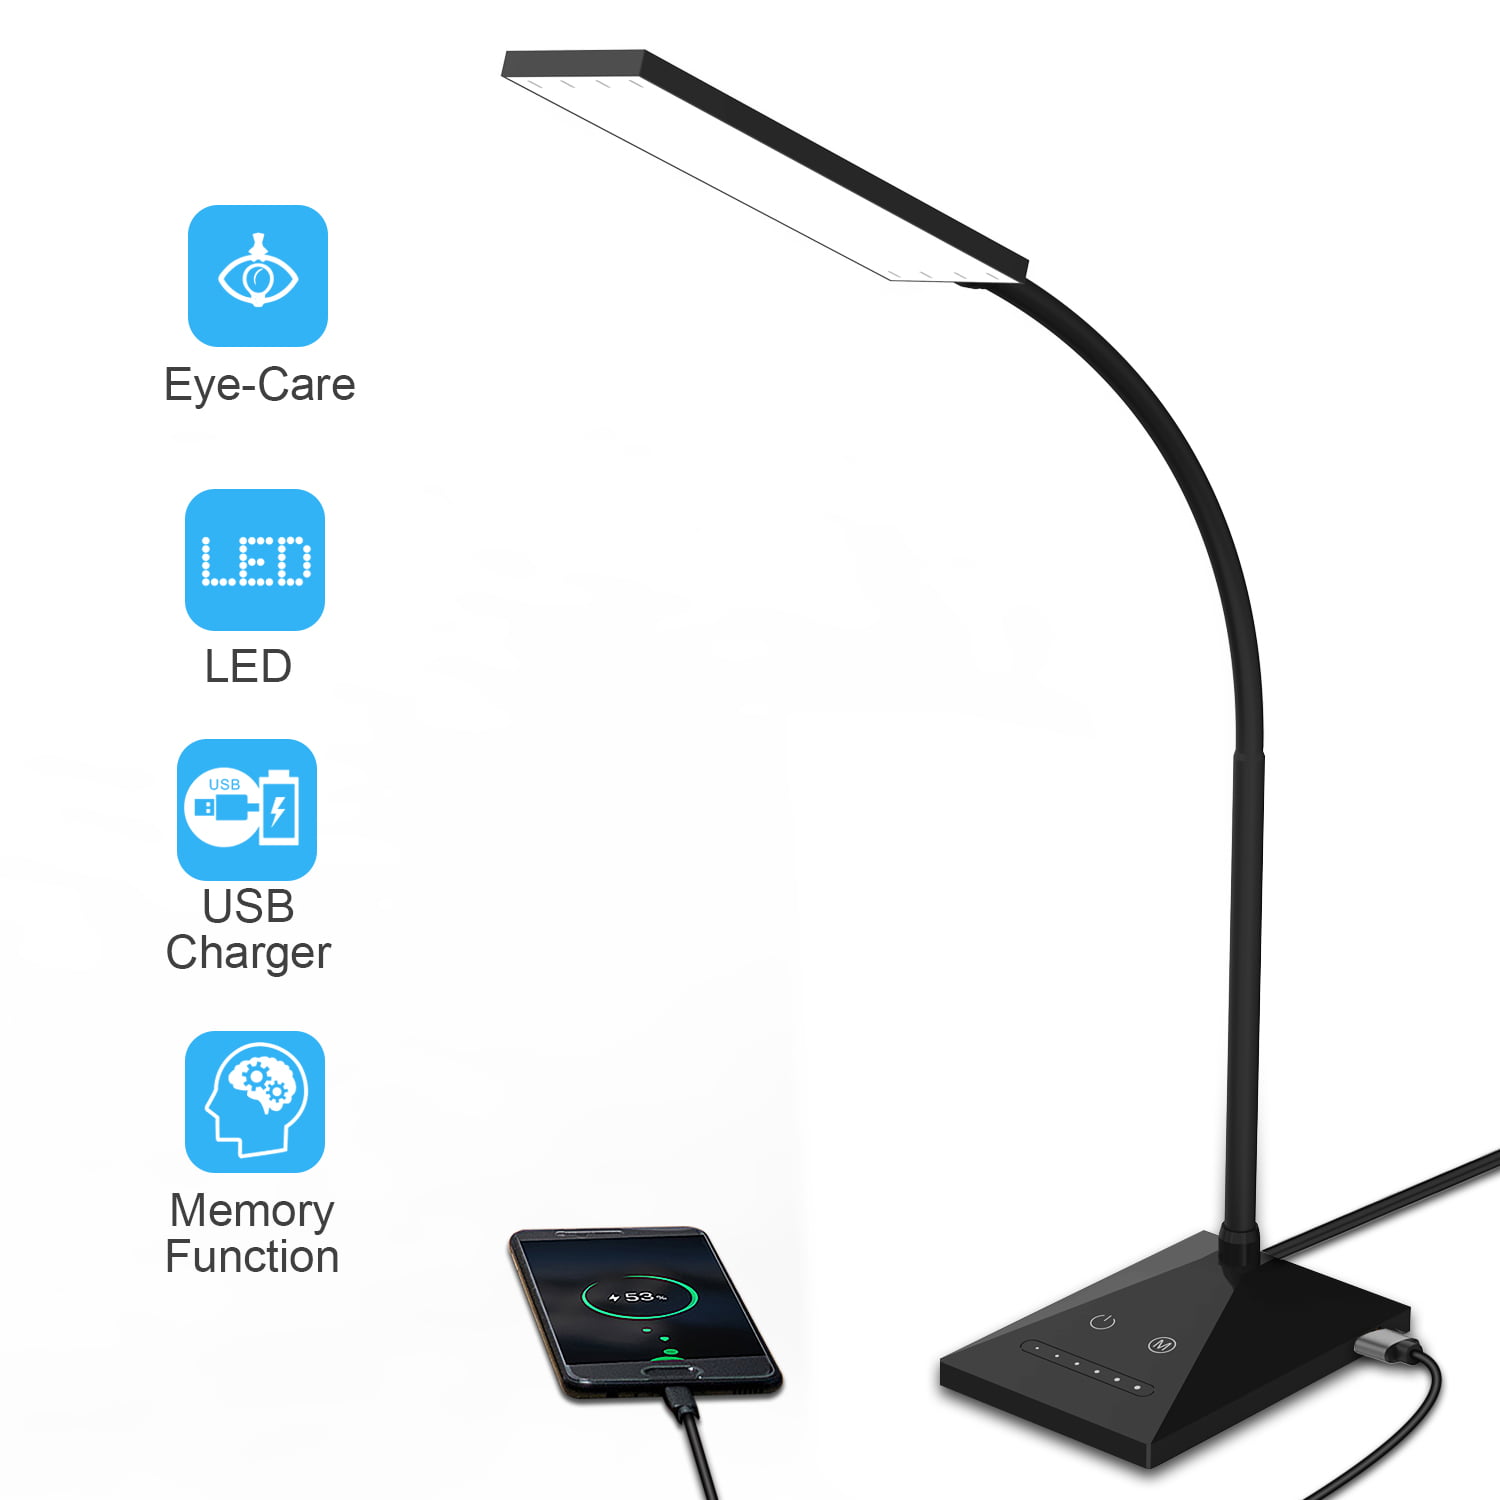 KOOTION LED Desk Lamp with USB Charging